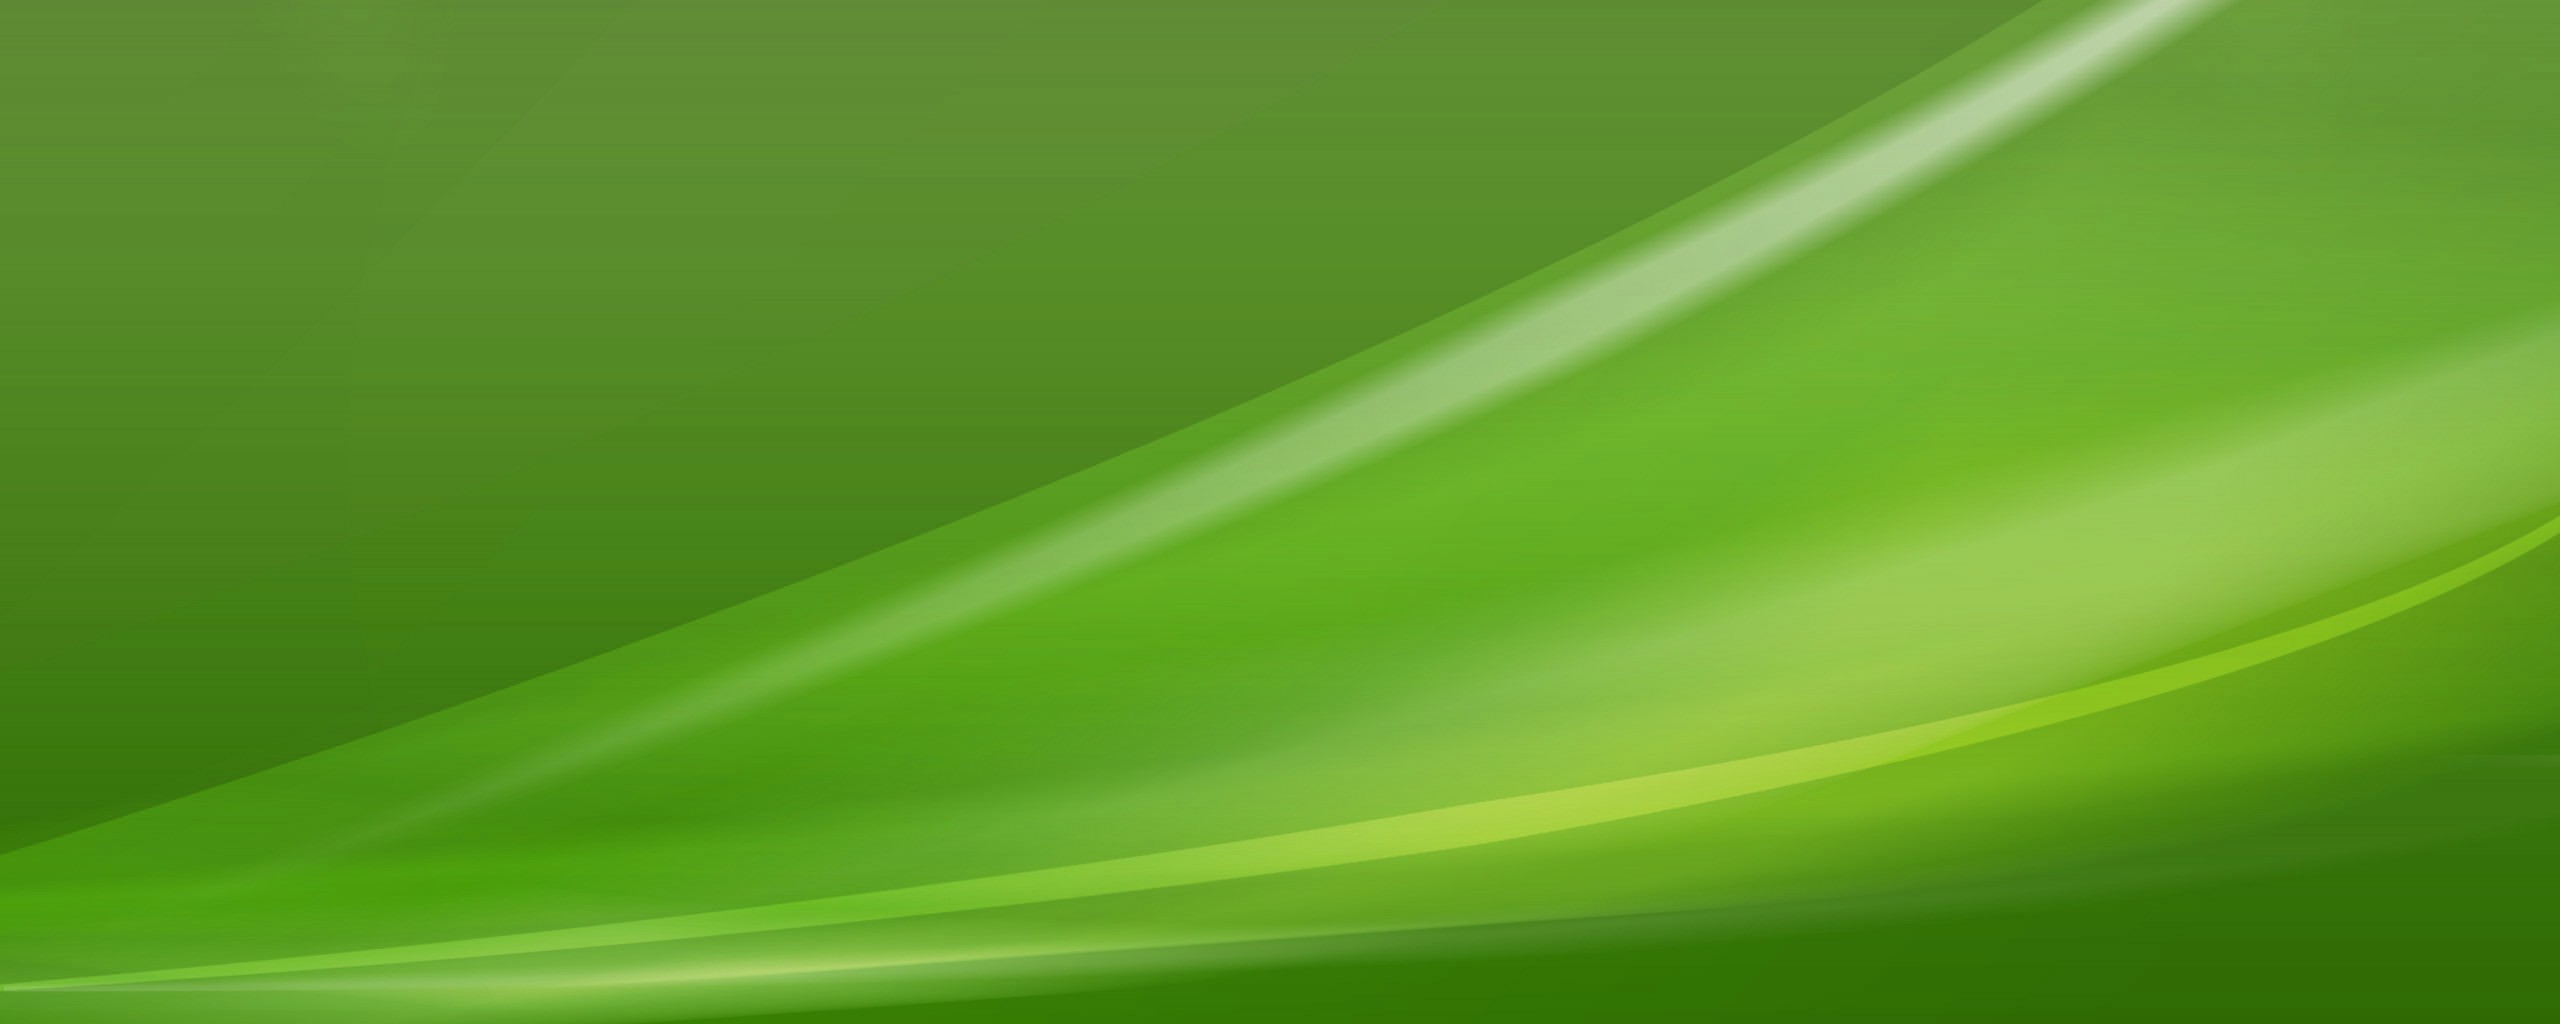 hd green screen background images